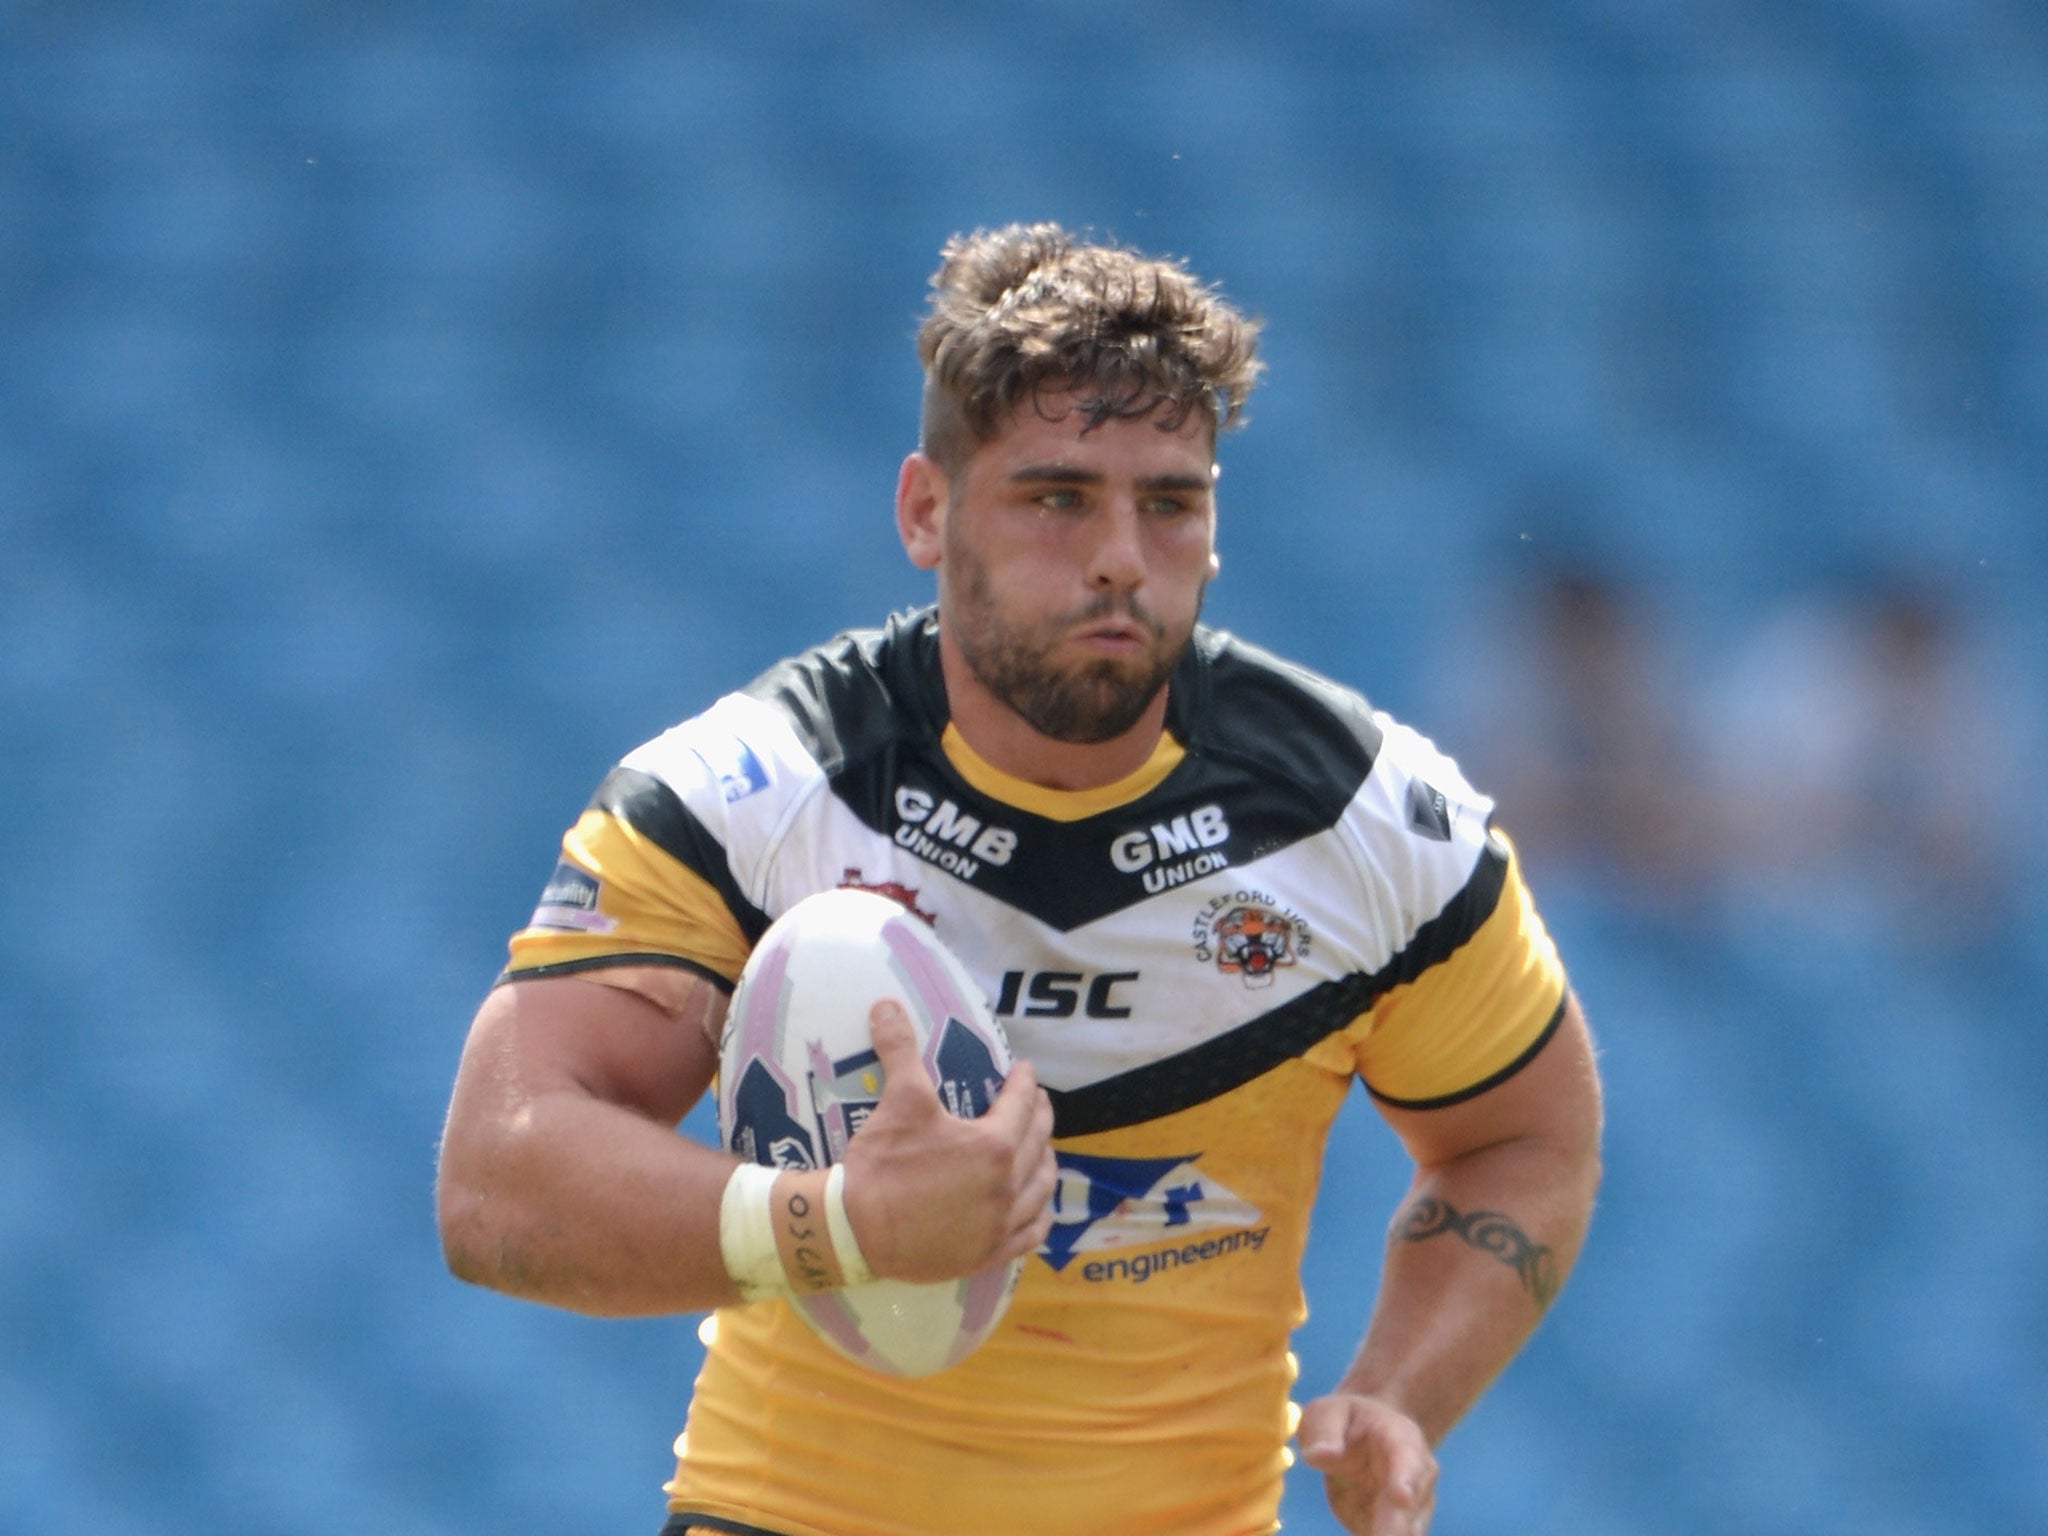 Castleford Tigers prop Lee Jewitt scored a try in their Challenge Cup win over Wigan